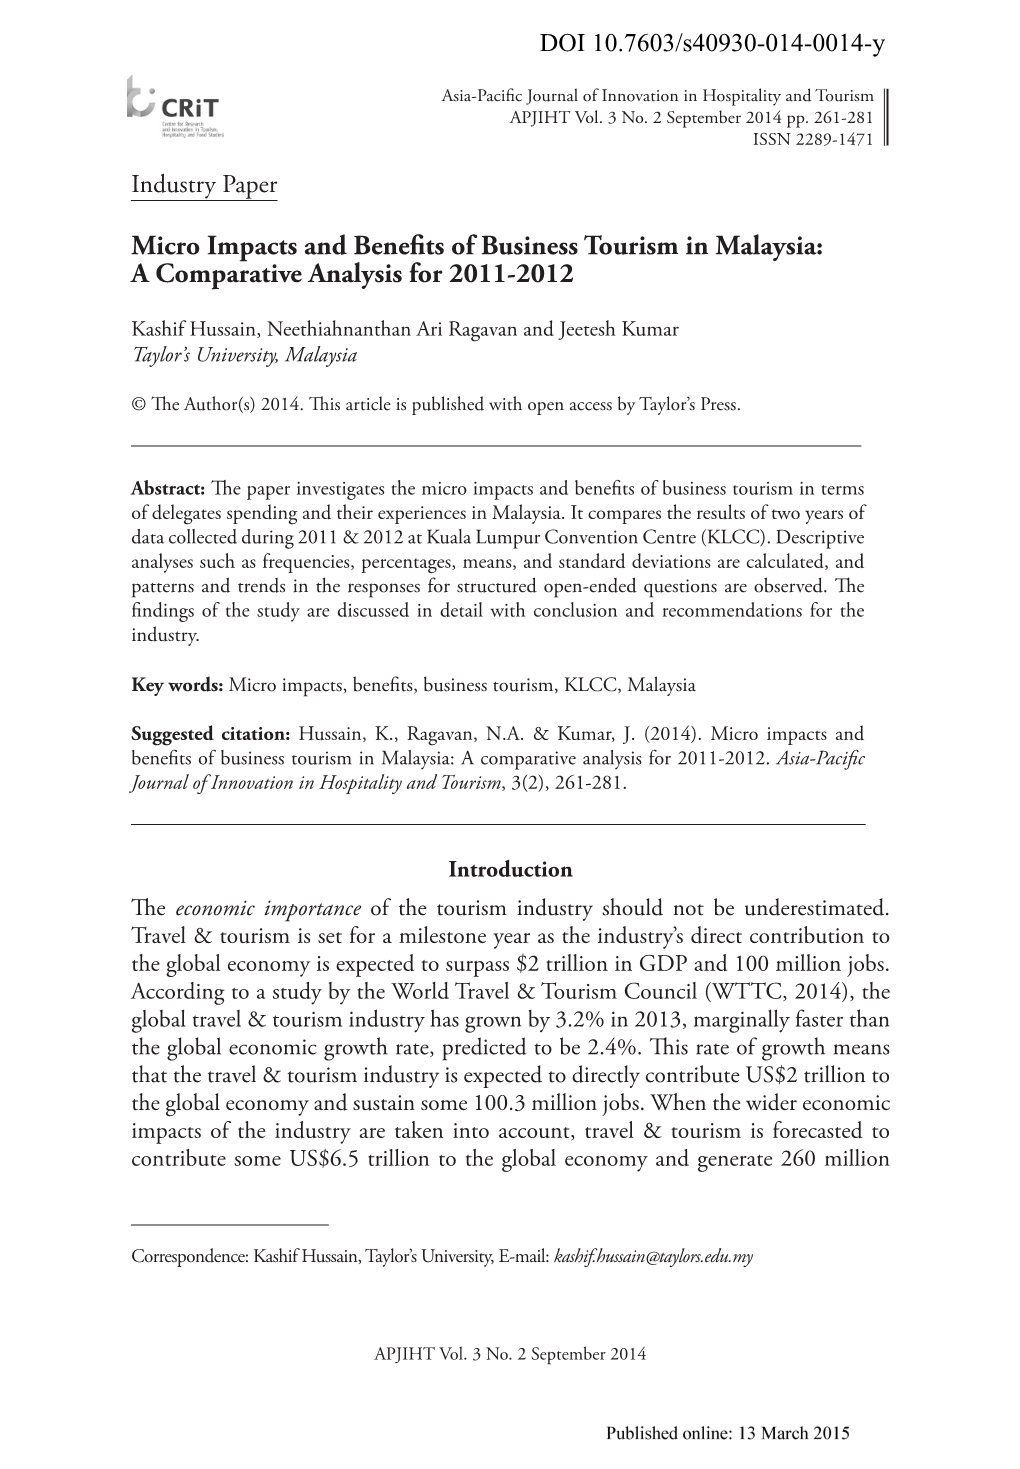 Micro Impacts and Benefits of Business Tourism in Malaysia: a Comparative Analysis for 2011-2012